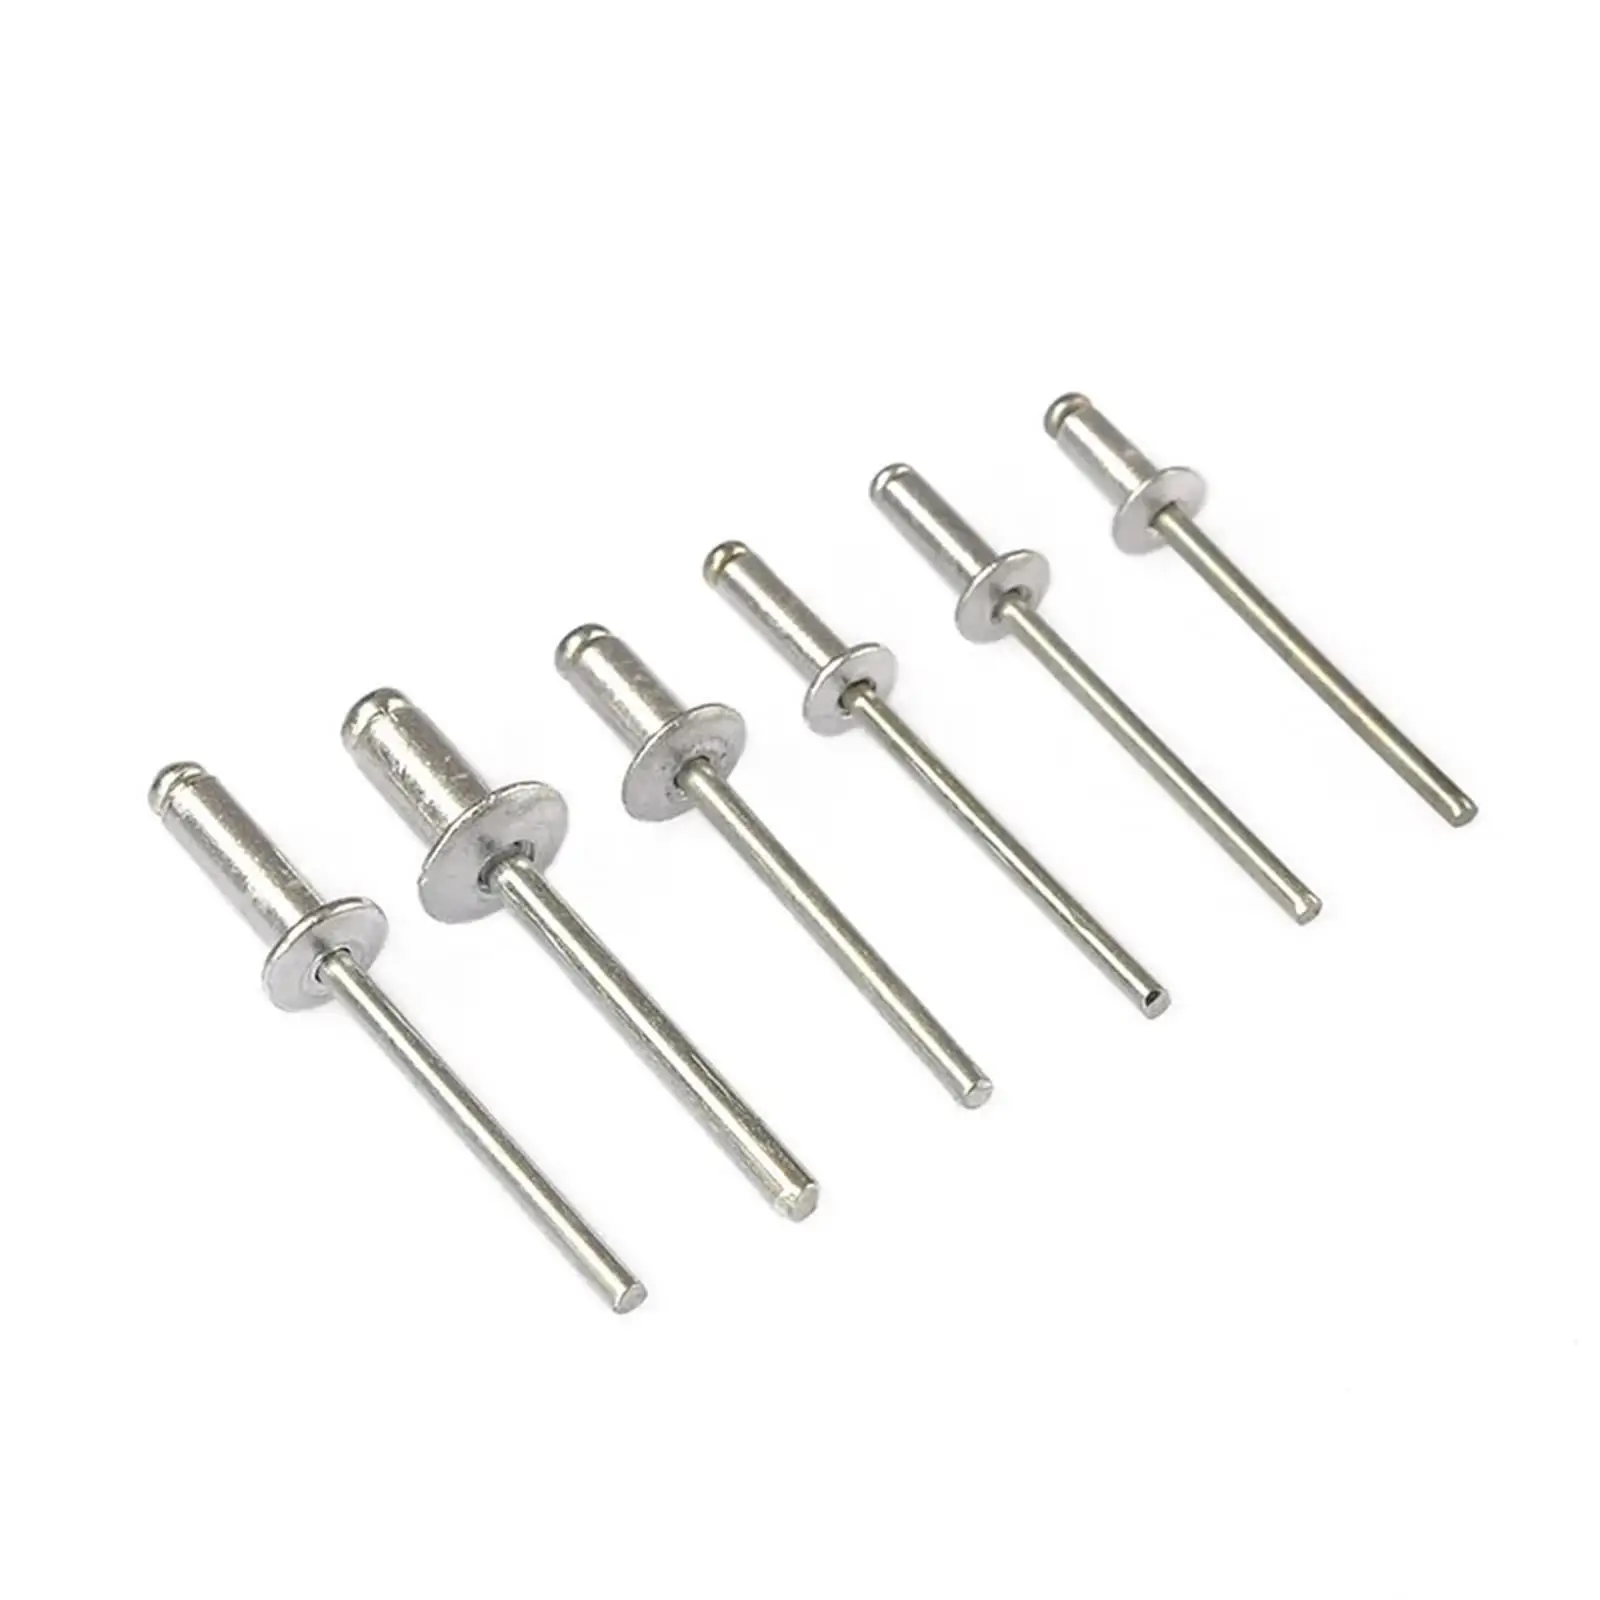 120x Blind Rivets Storage Case Portable Nail Pull for Installing Accessories Multipurpose Dome Head Heavy Duty Aluminum Rivets